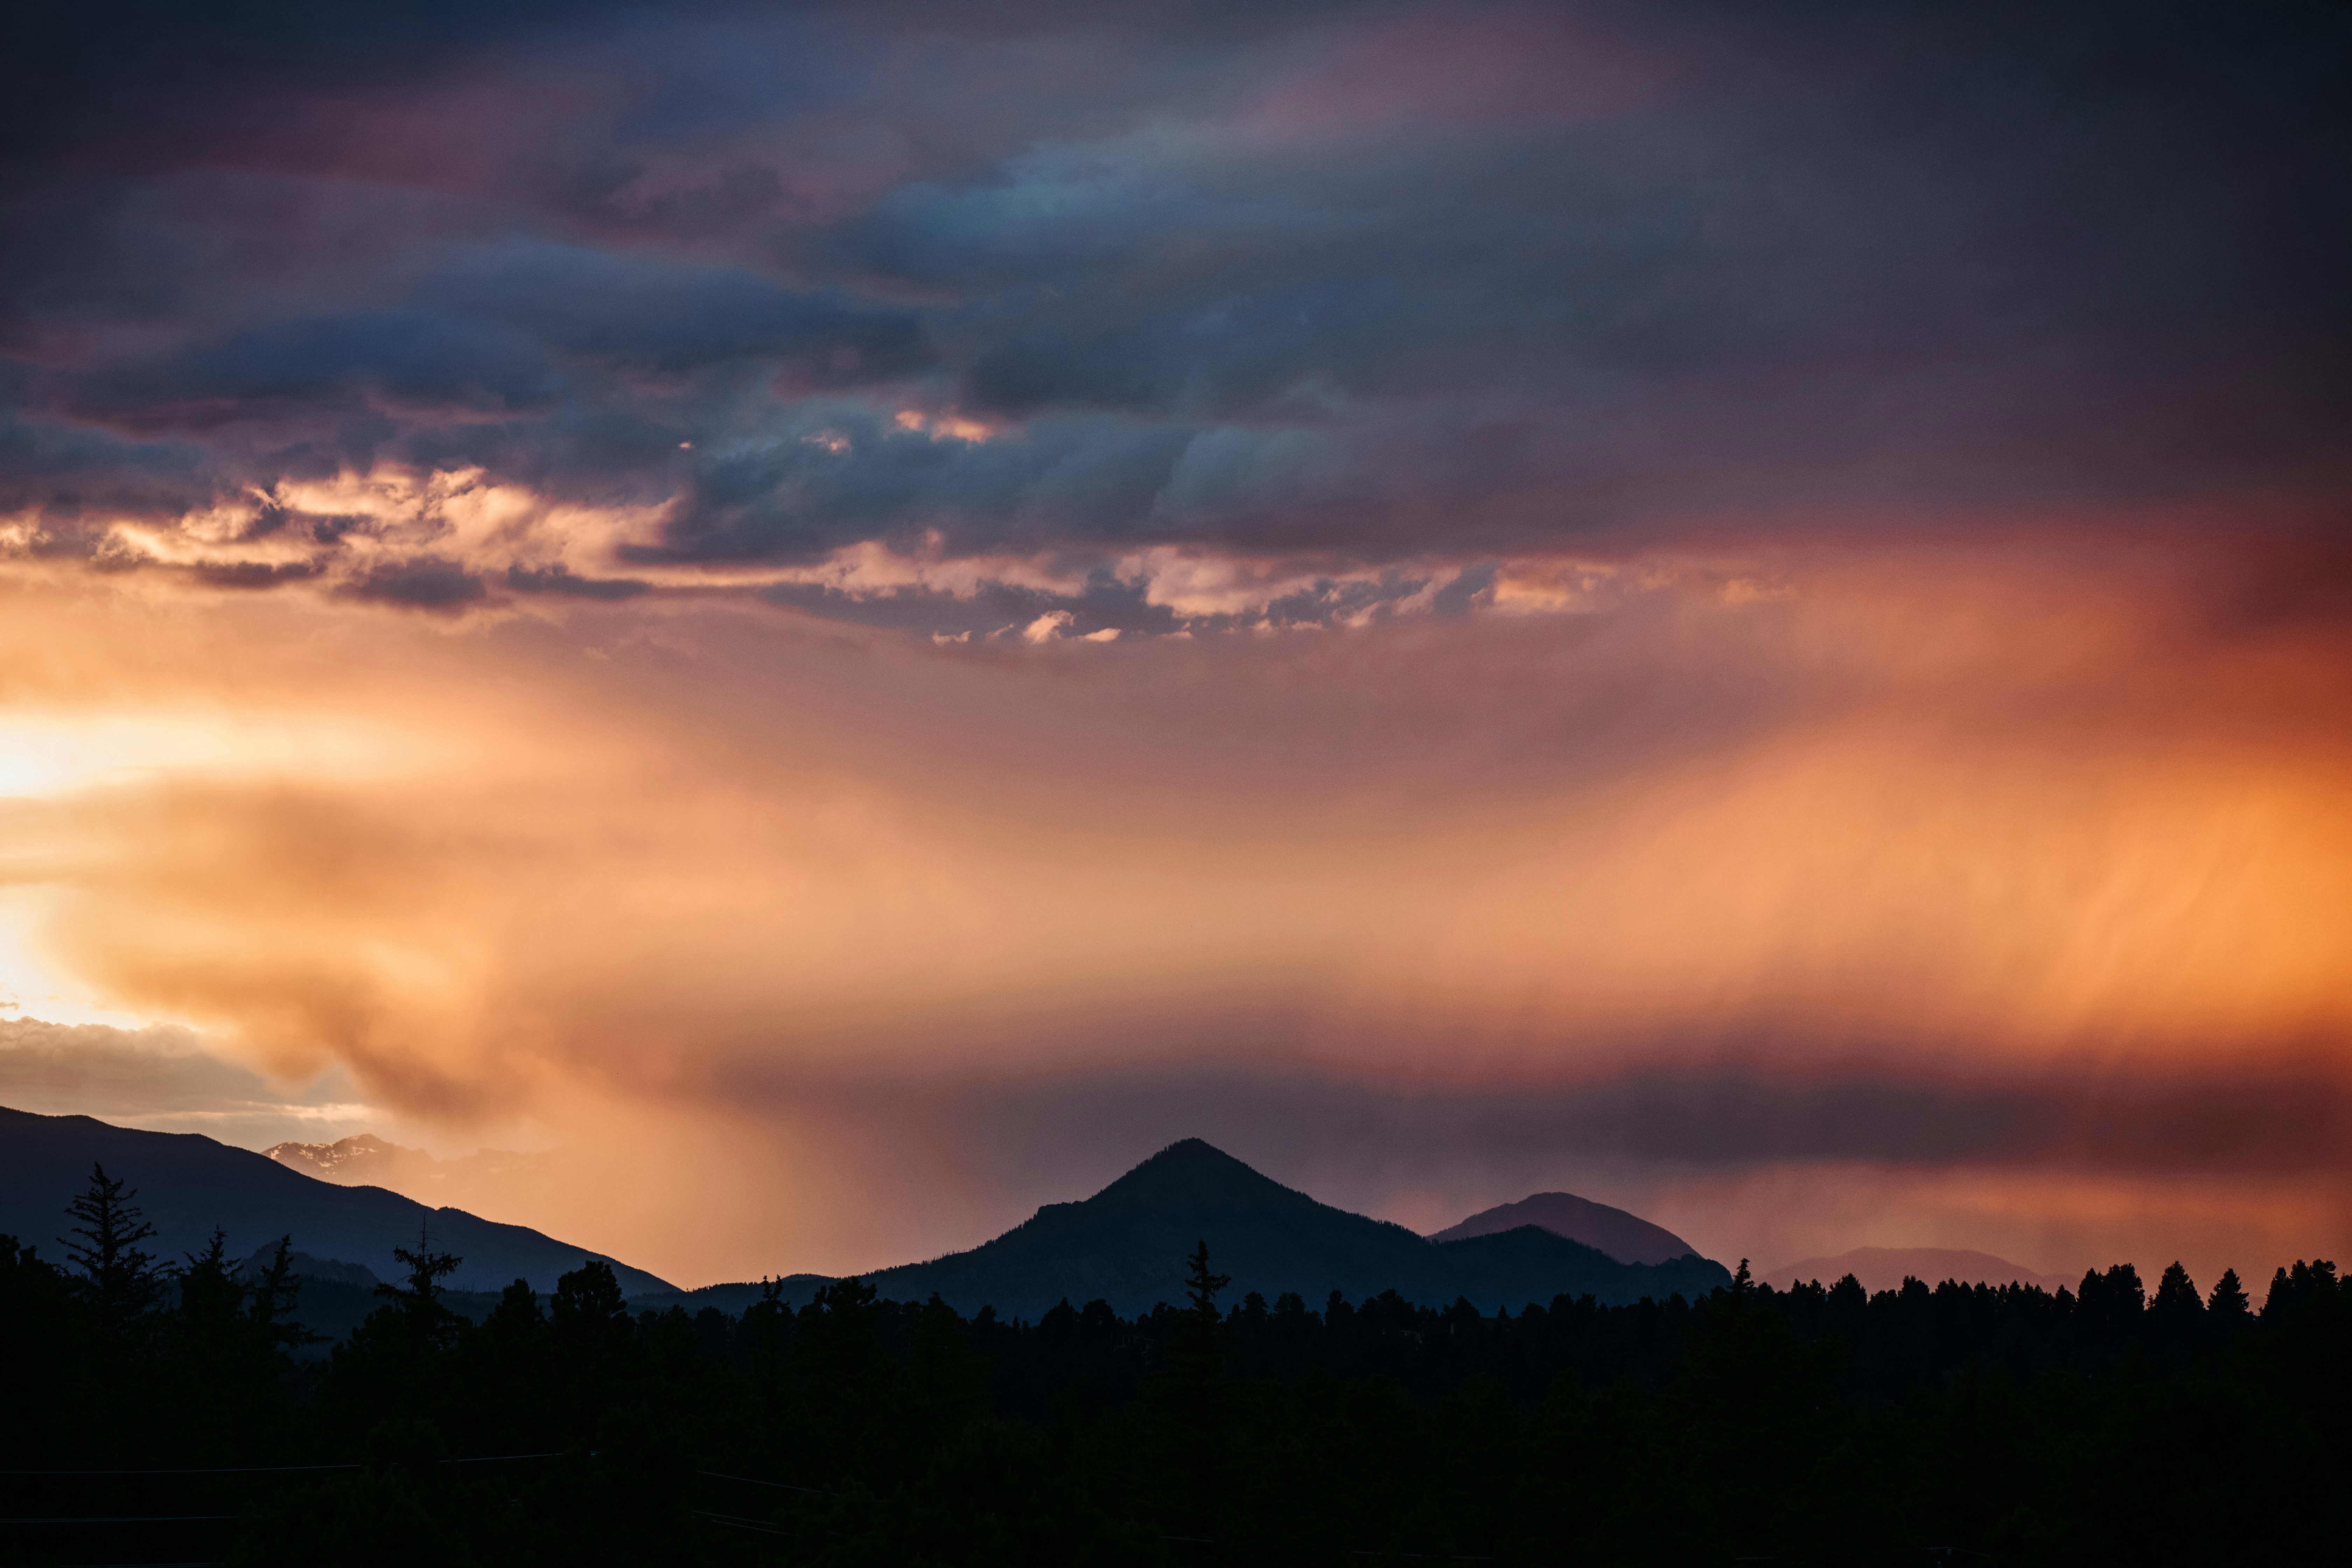 A sunset lights up over a mountain in the distance. Mountains further away can be seen behind the clouds.